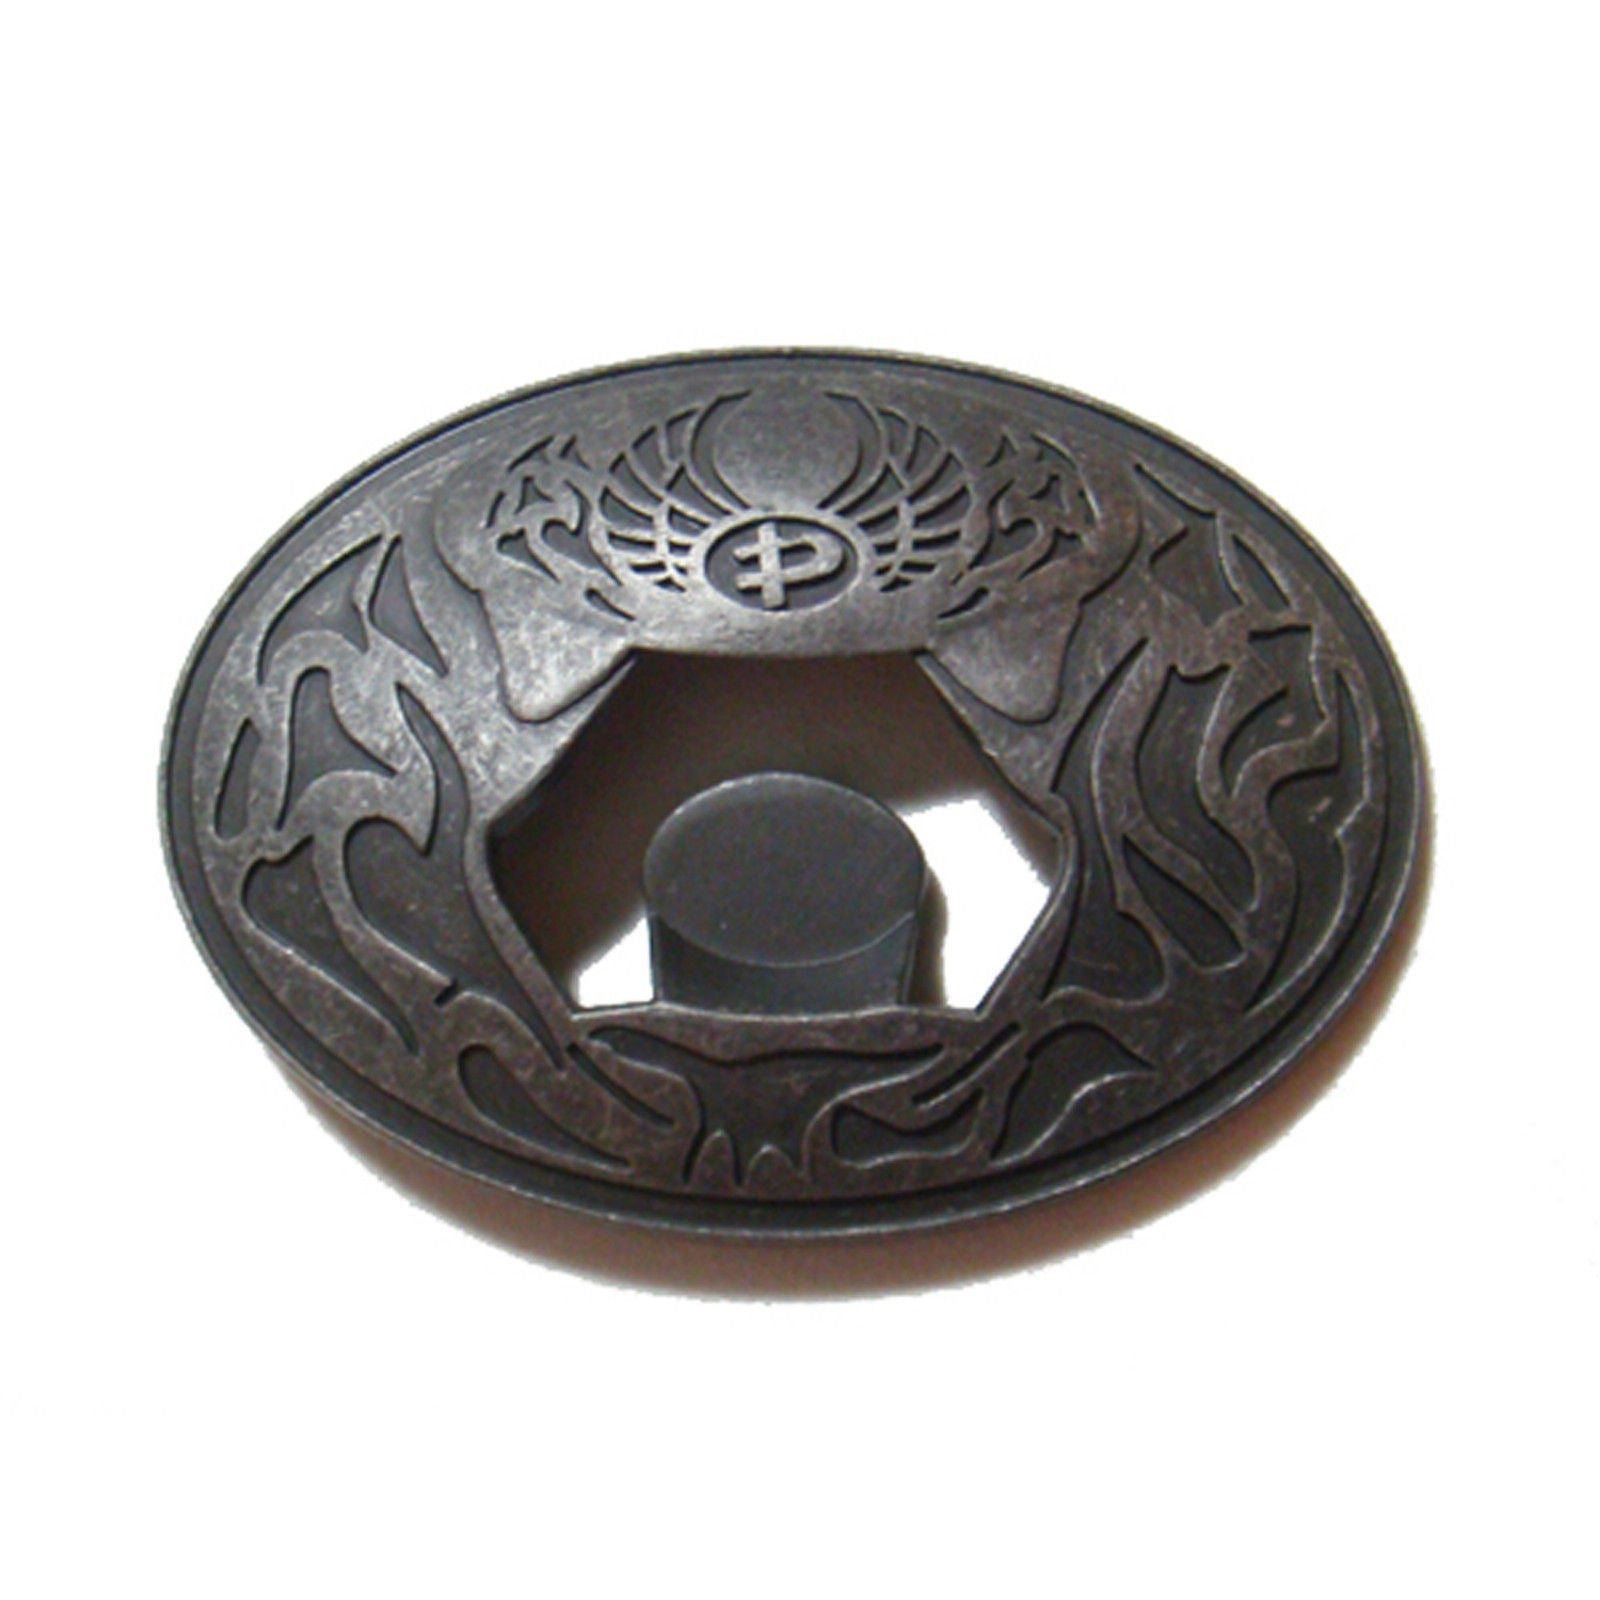 Poorboy - Poorboy - Bottle Opening Belt Buckle - Products - The Mysto Spot